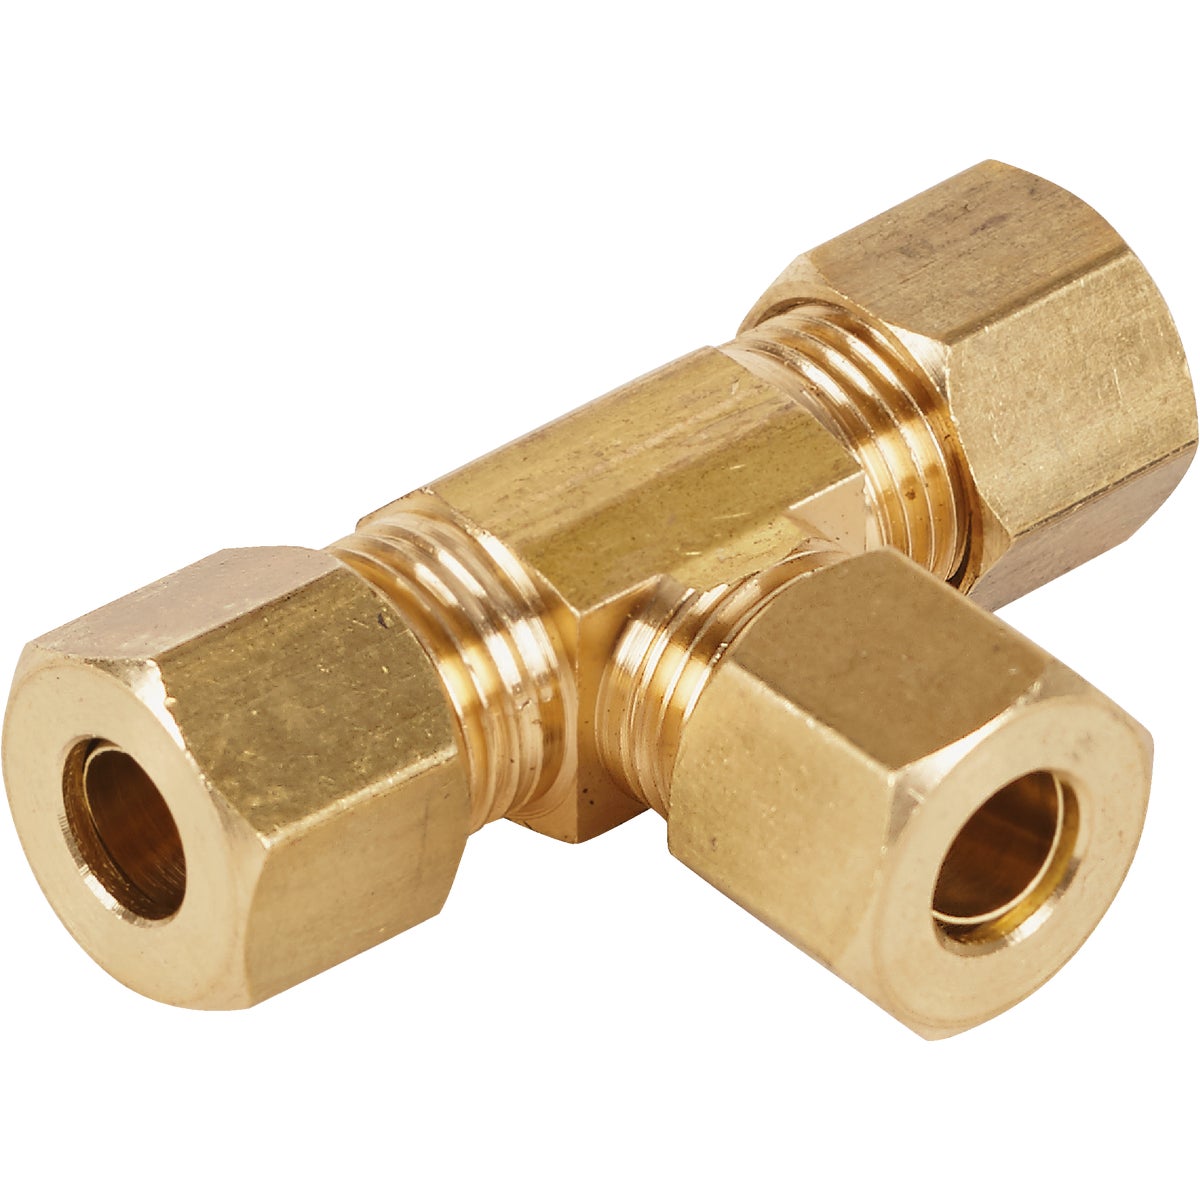 Item 458414, 3-way compression fittings. O.D. tube size. 1 per card.